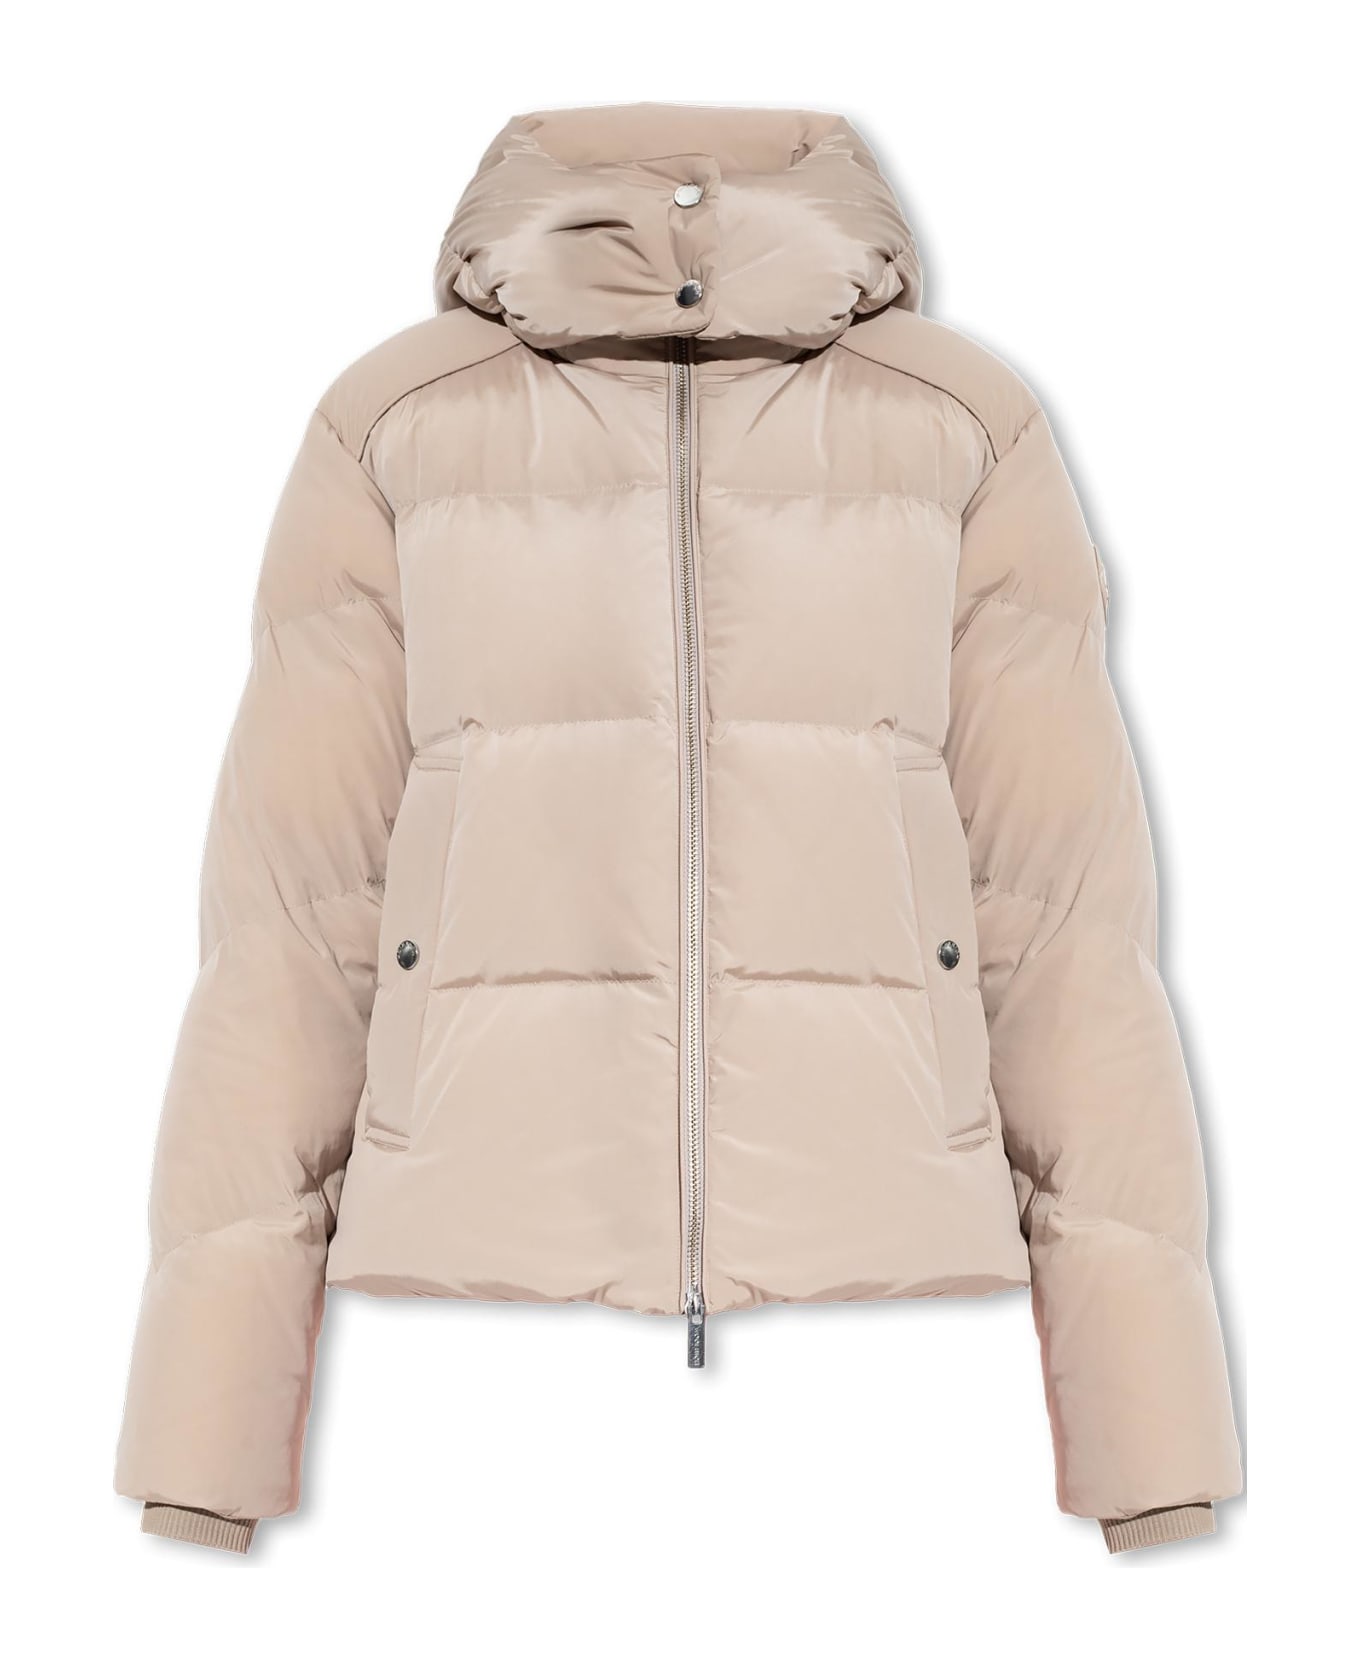 Woolrich 'alsea' Down Jacket - Taupe